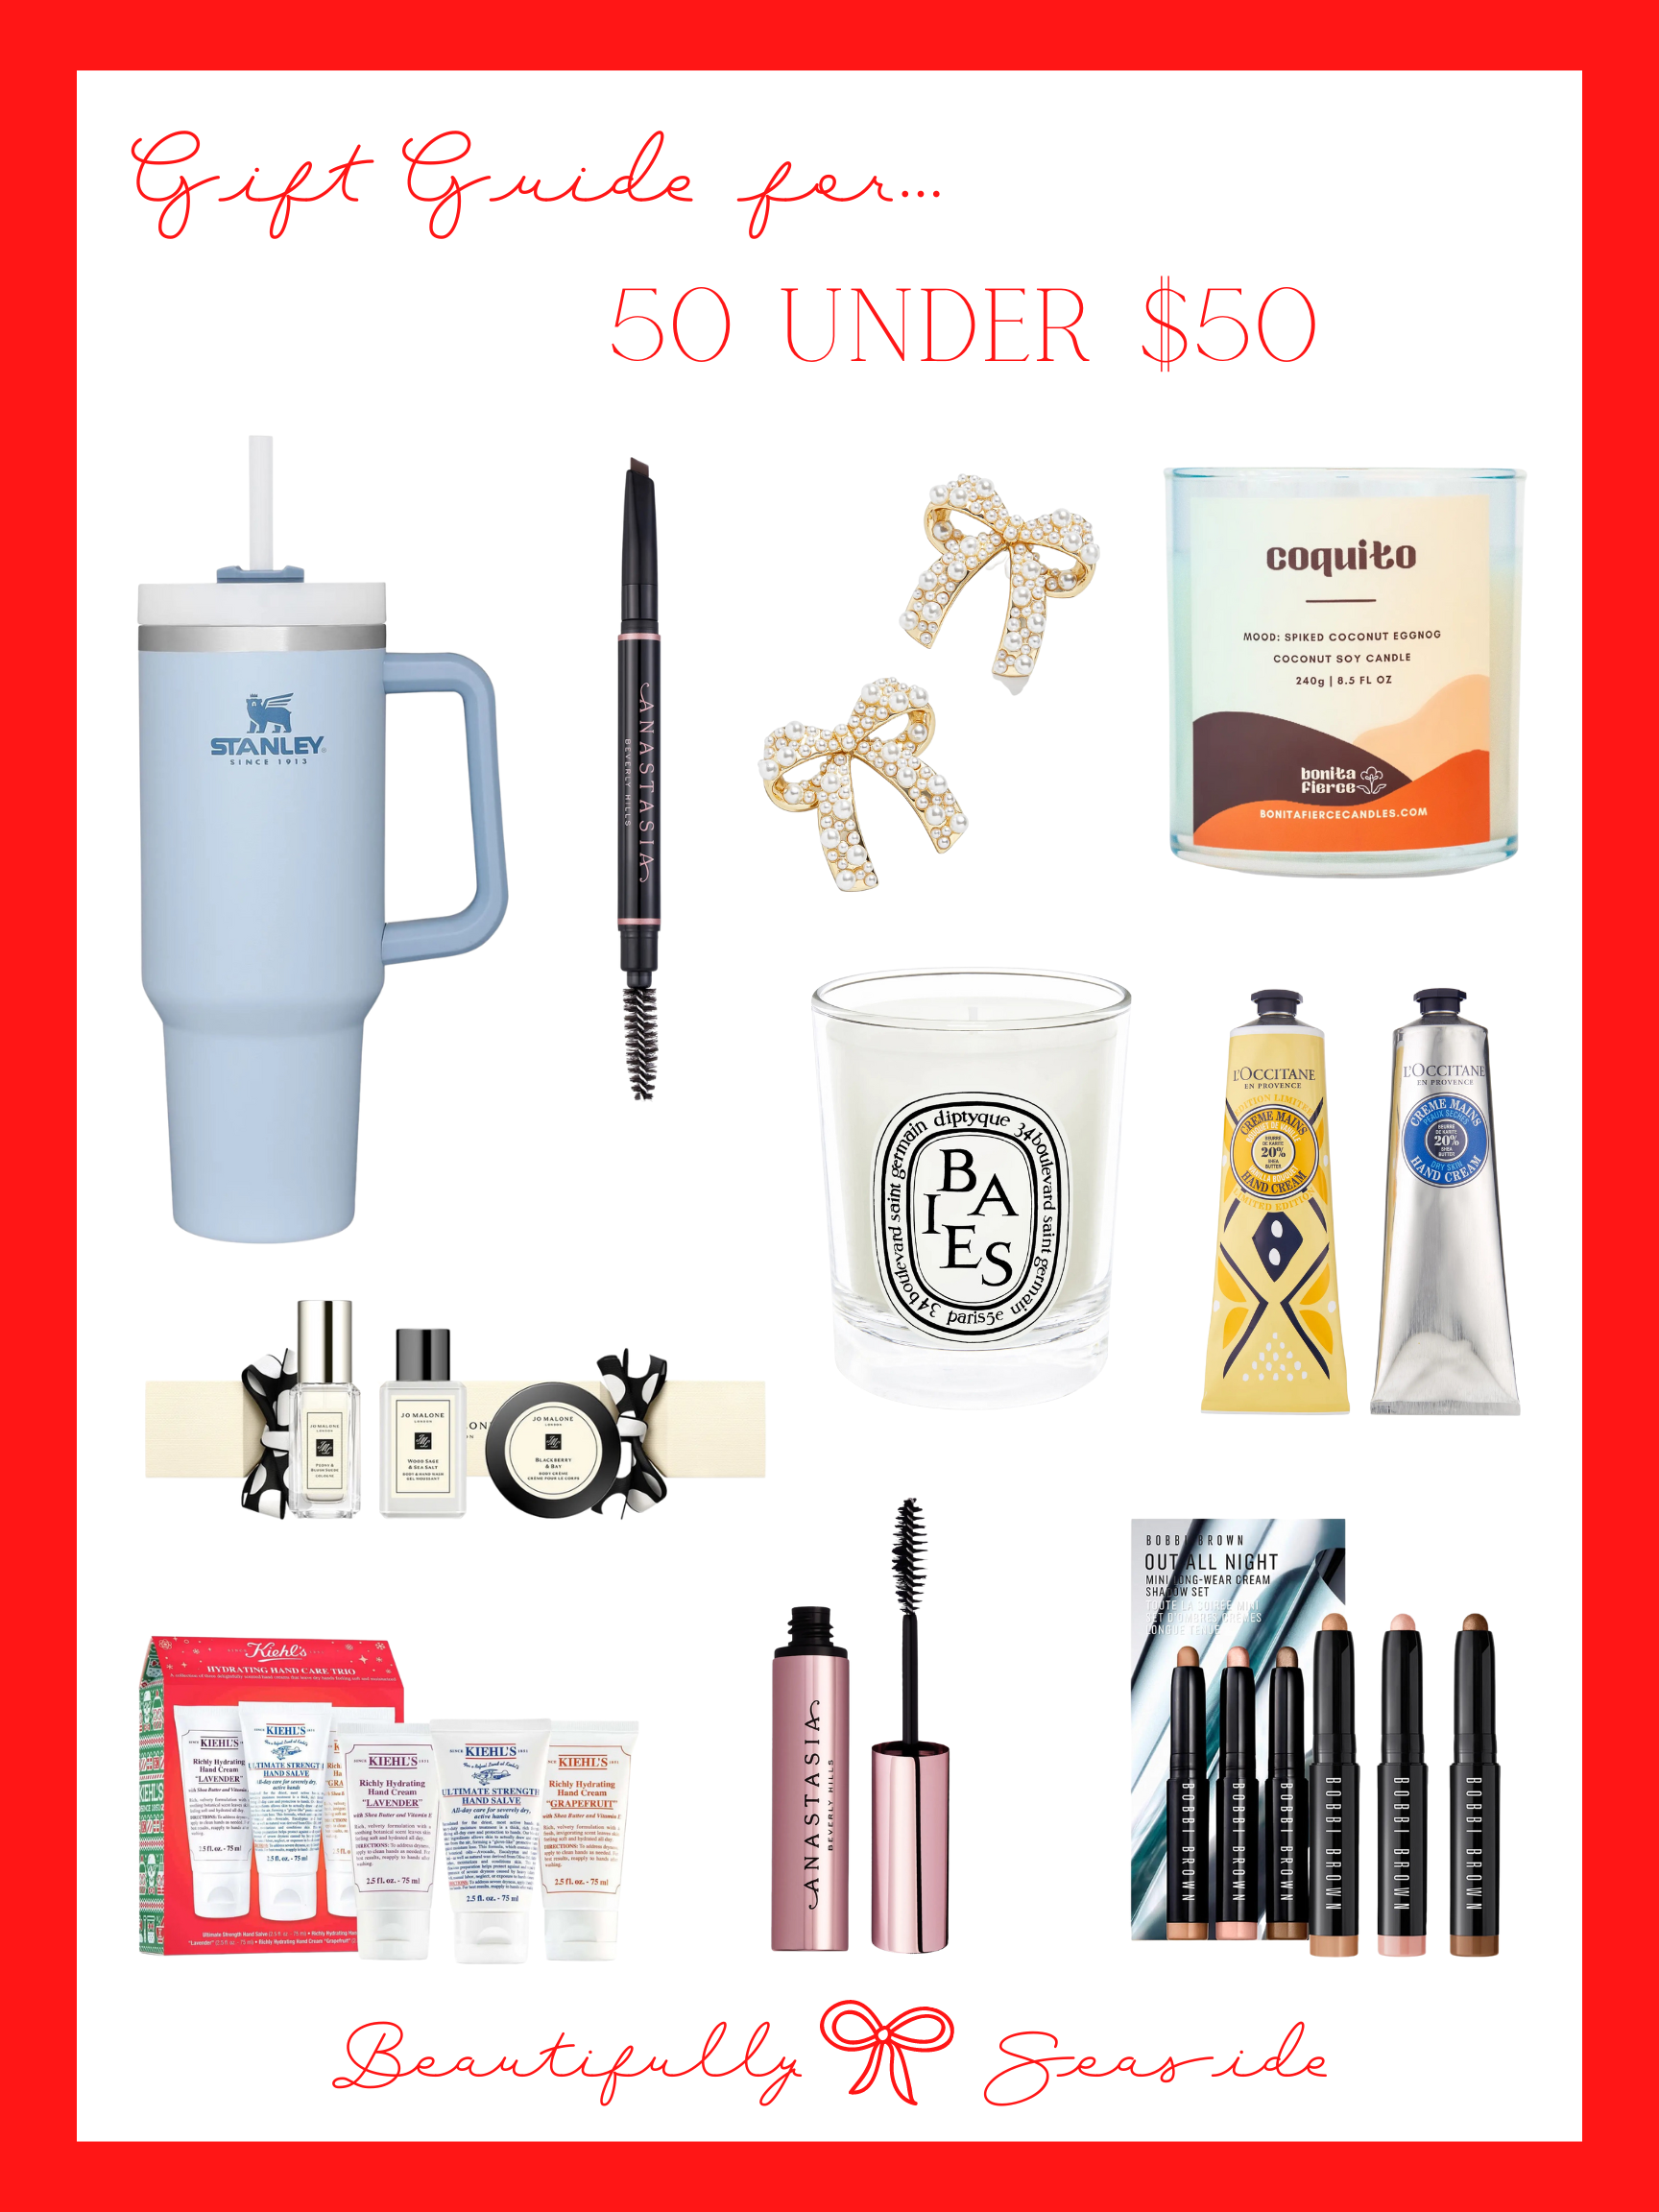 Desiree Leone of Beautifully Seaside shares the 50 under $50 holiday gift guide. Shop gifts in fashion, home, and beauty.